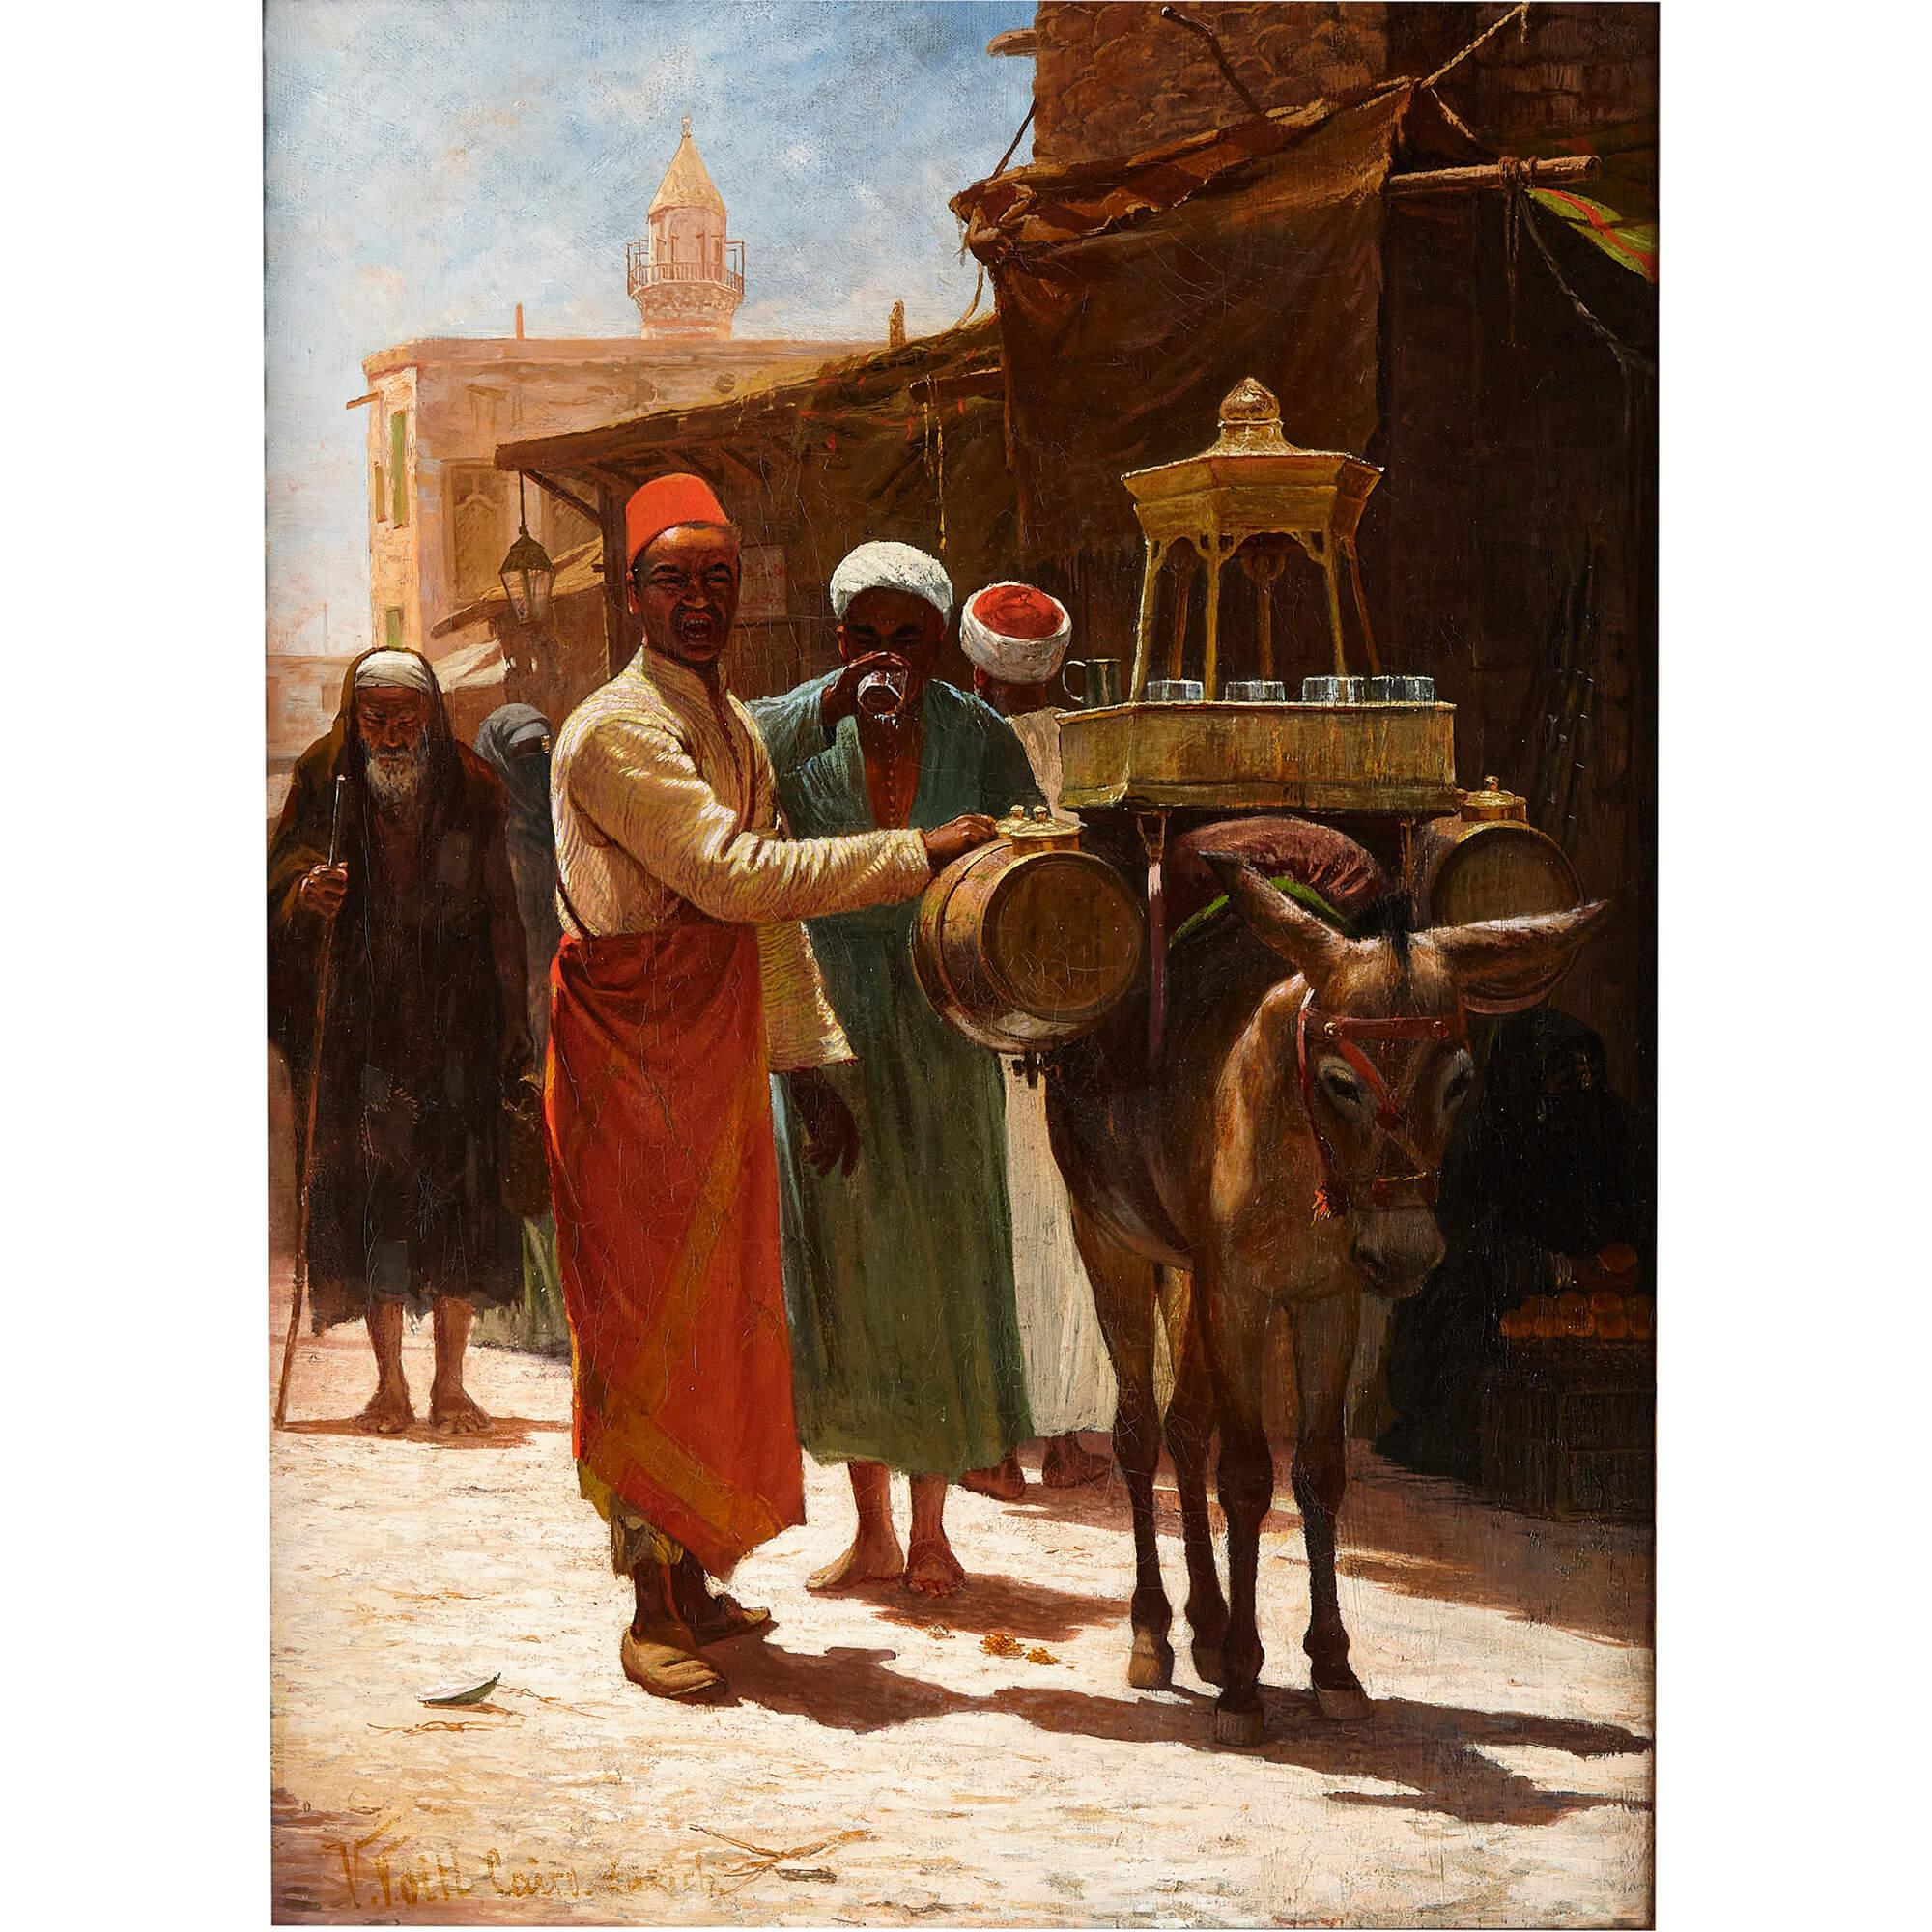 Orientalist oil painting of Cairo street and drinks salesman by Voill
Swiss, Late 19th Century 
Canvas: Height 65cm, width 47cm
Frame: Height 87cm, width 69cm, depth 7cm

Using deft strokes of oil on canvas, V. Voill immortalized the spirited